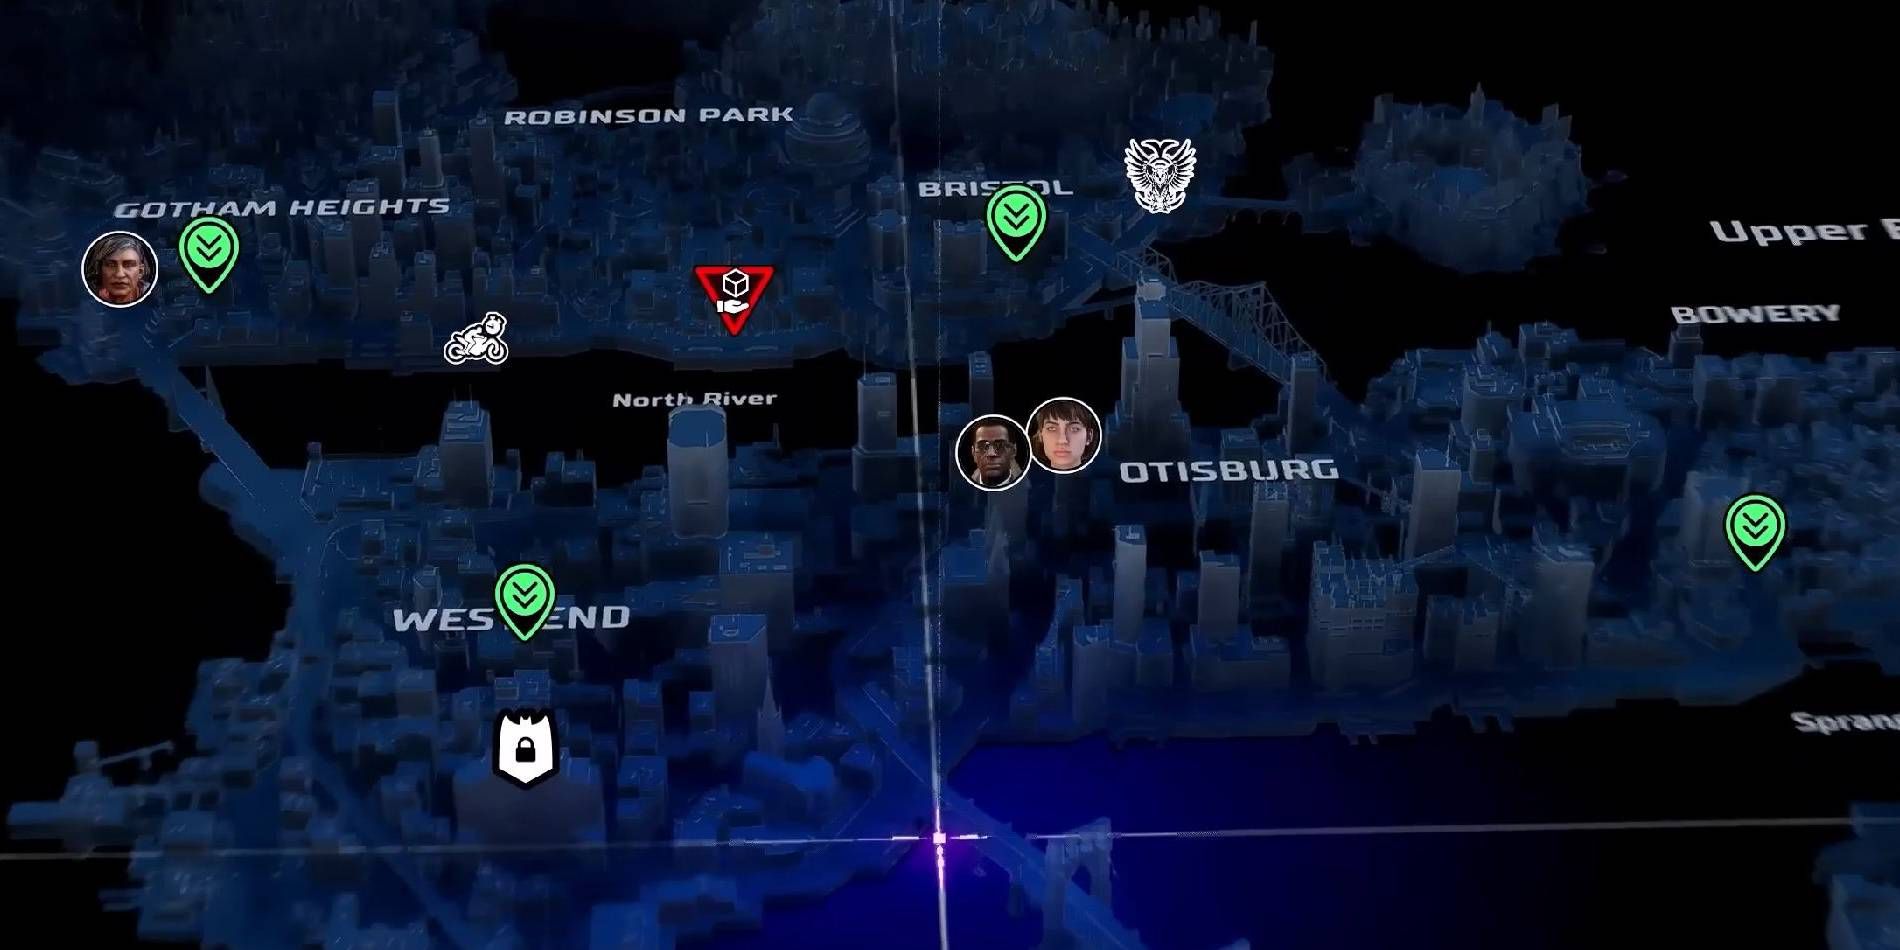 Gotham Knights Map Navigation Screenshot with Several Objective Markers and Important Character Locations Indicated near Otisburg and Gotham Heights Districts